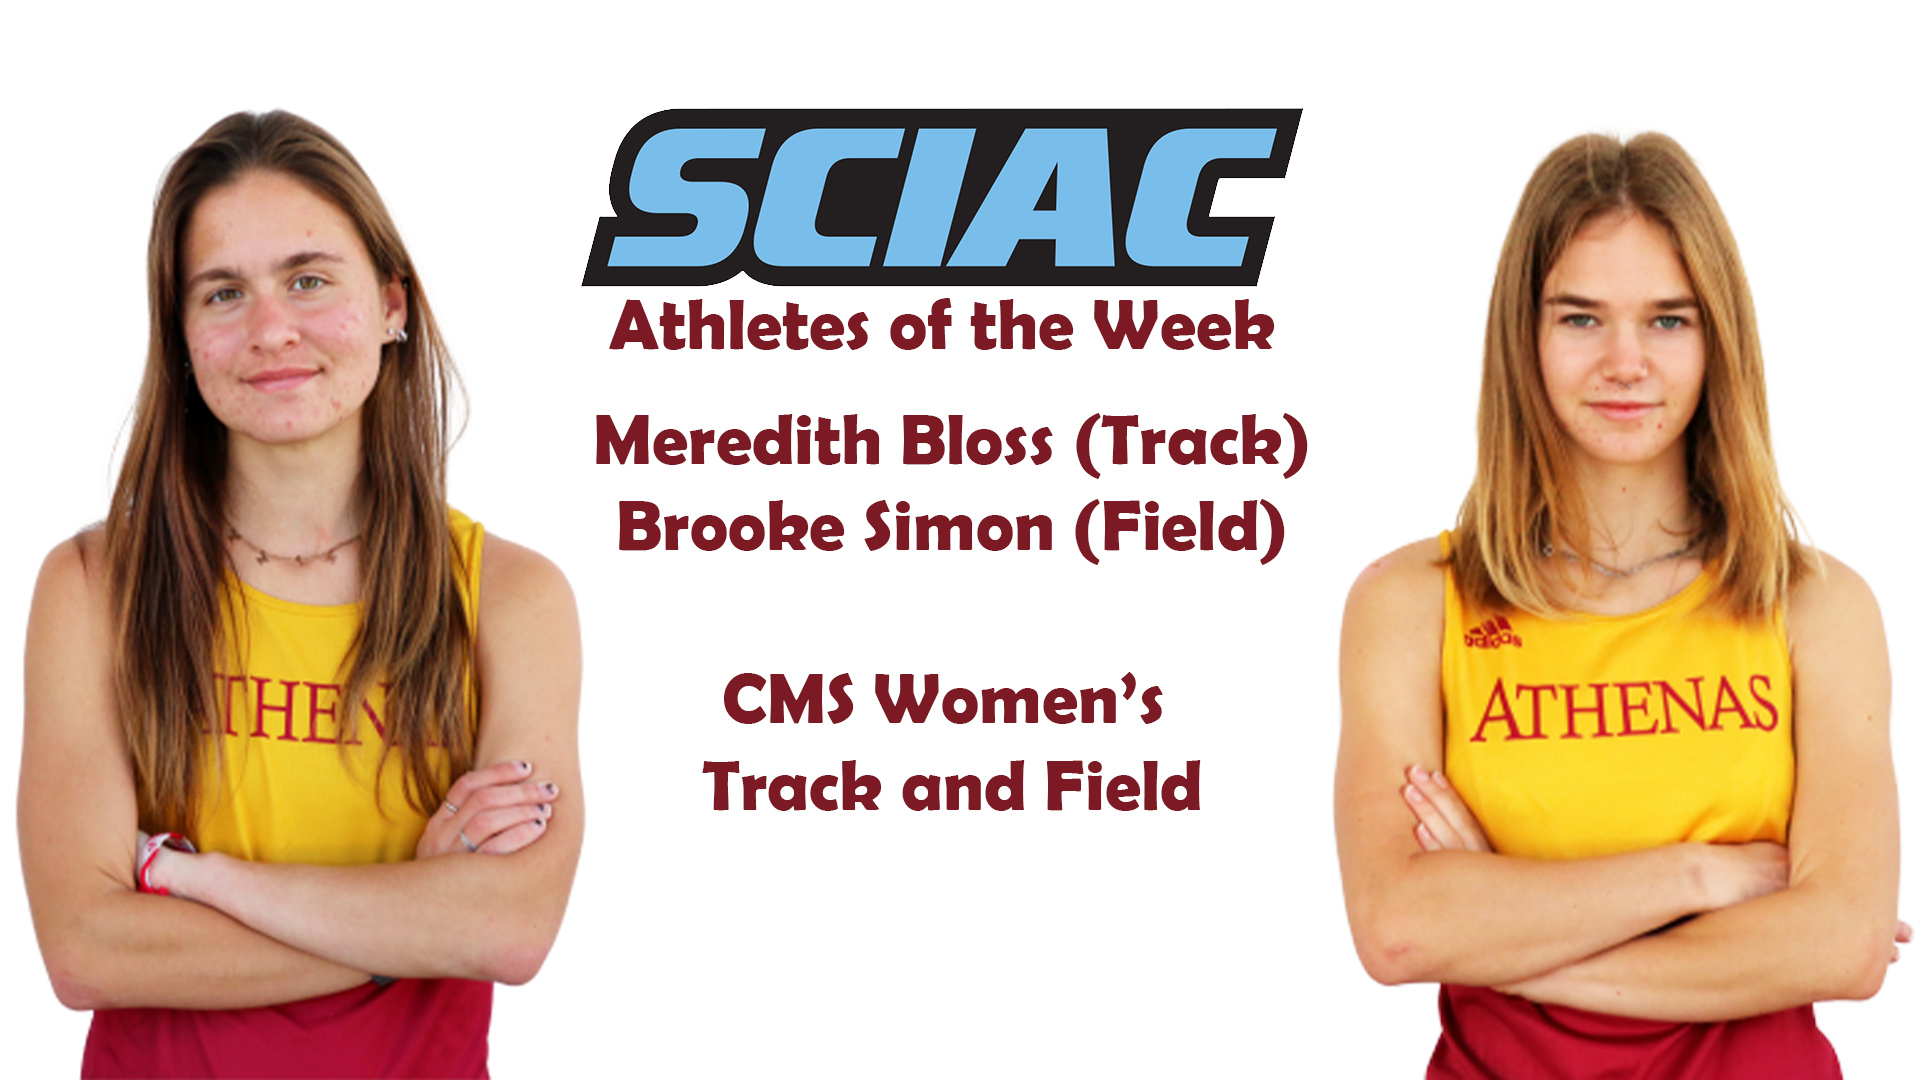 Posed photos of Meredith Bloss and Brooke Simon with SCIAC logo